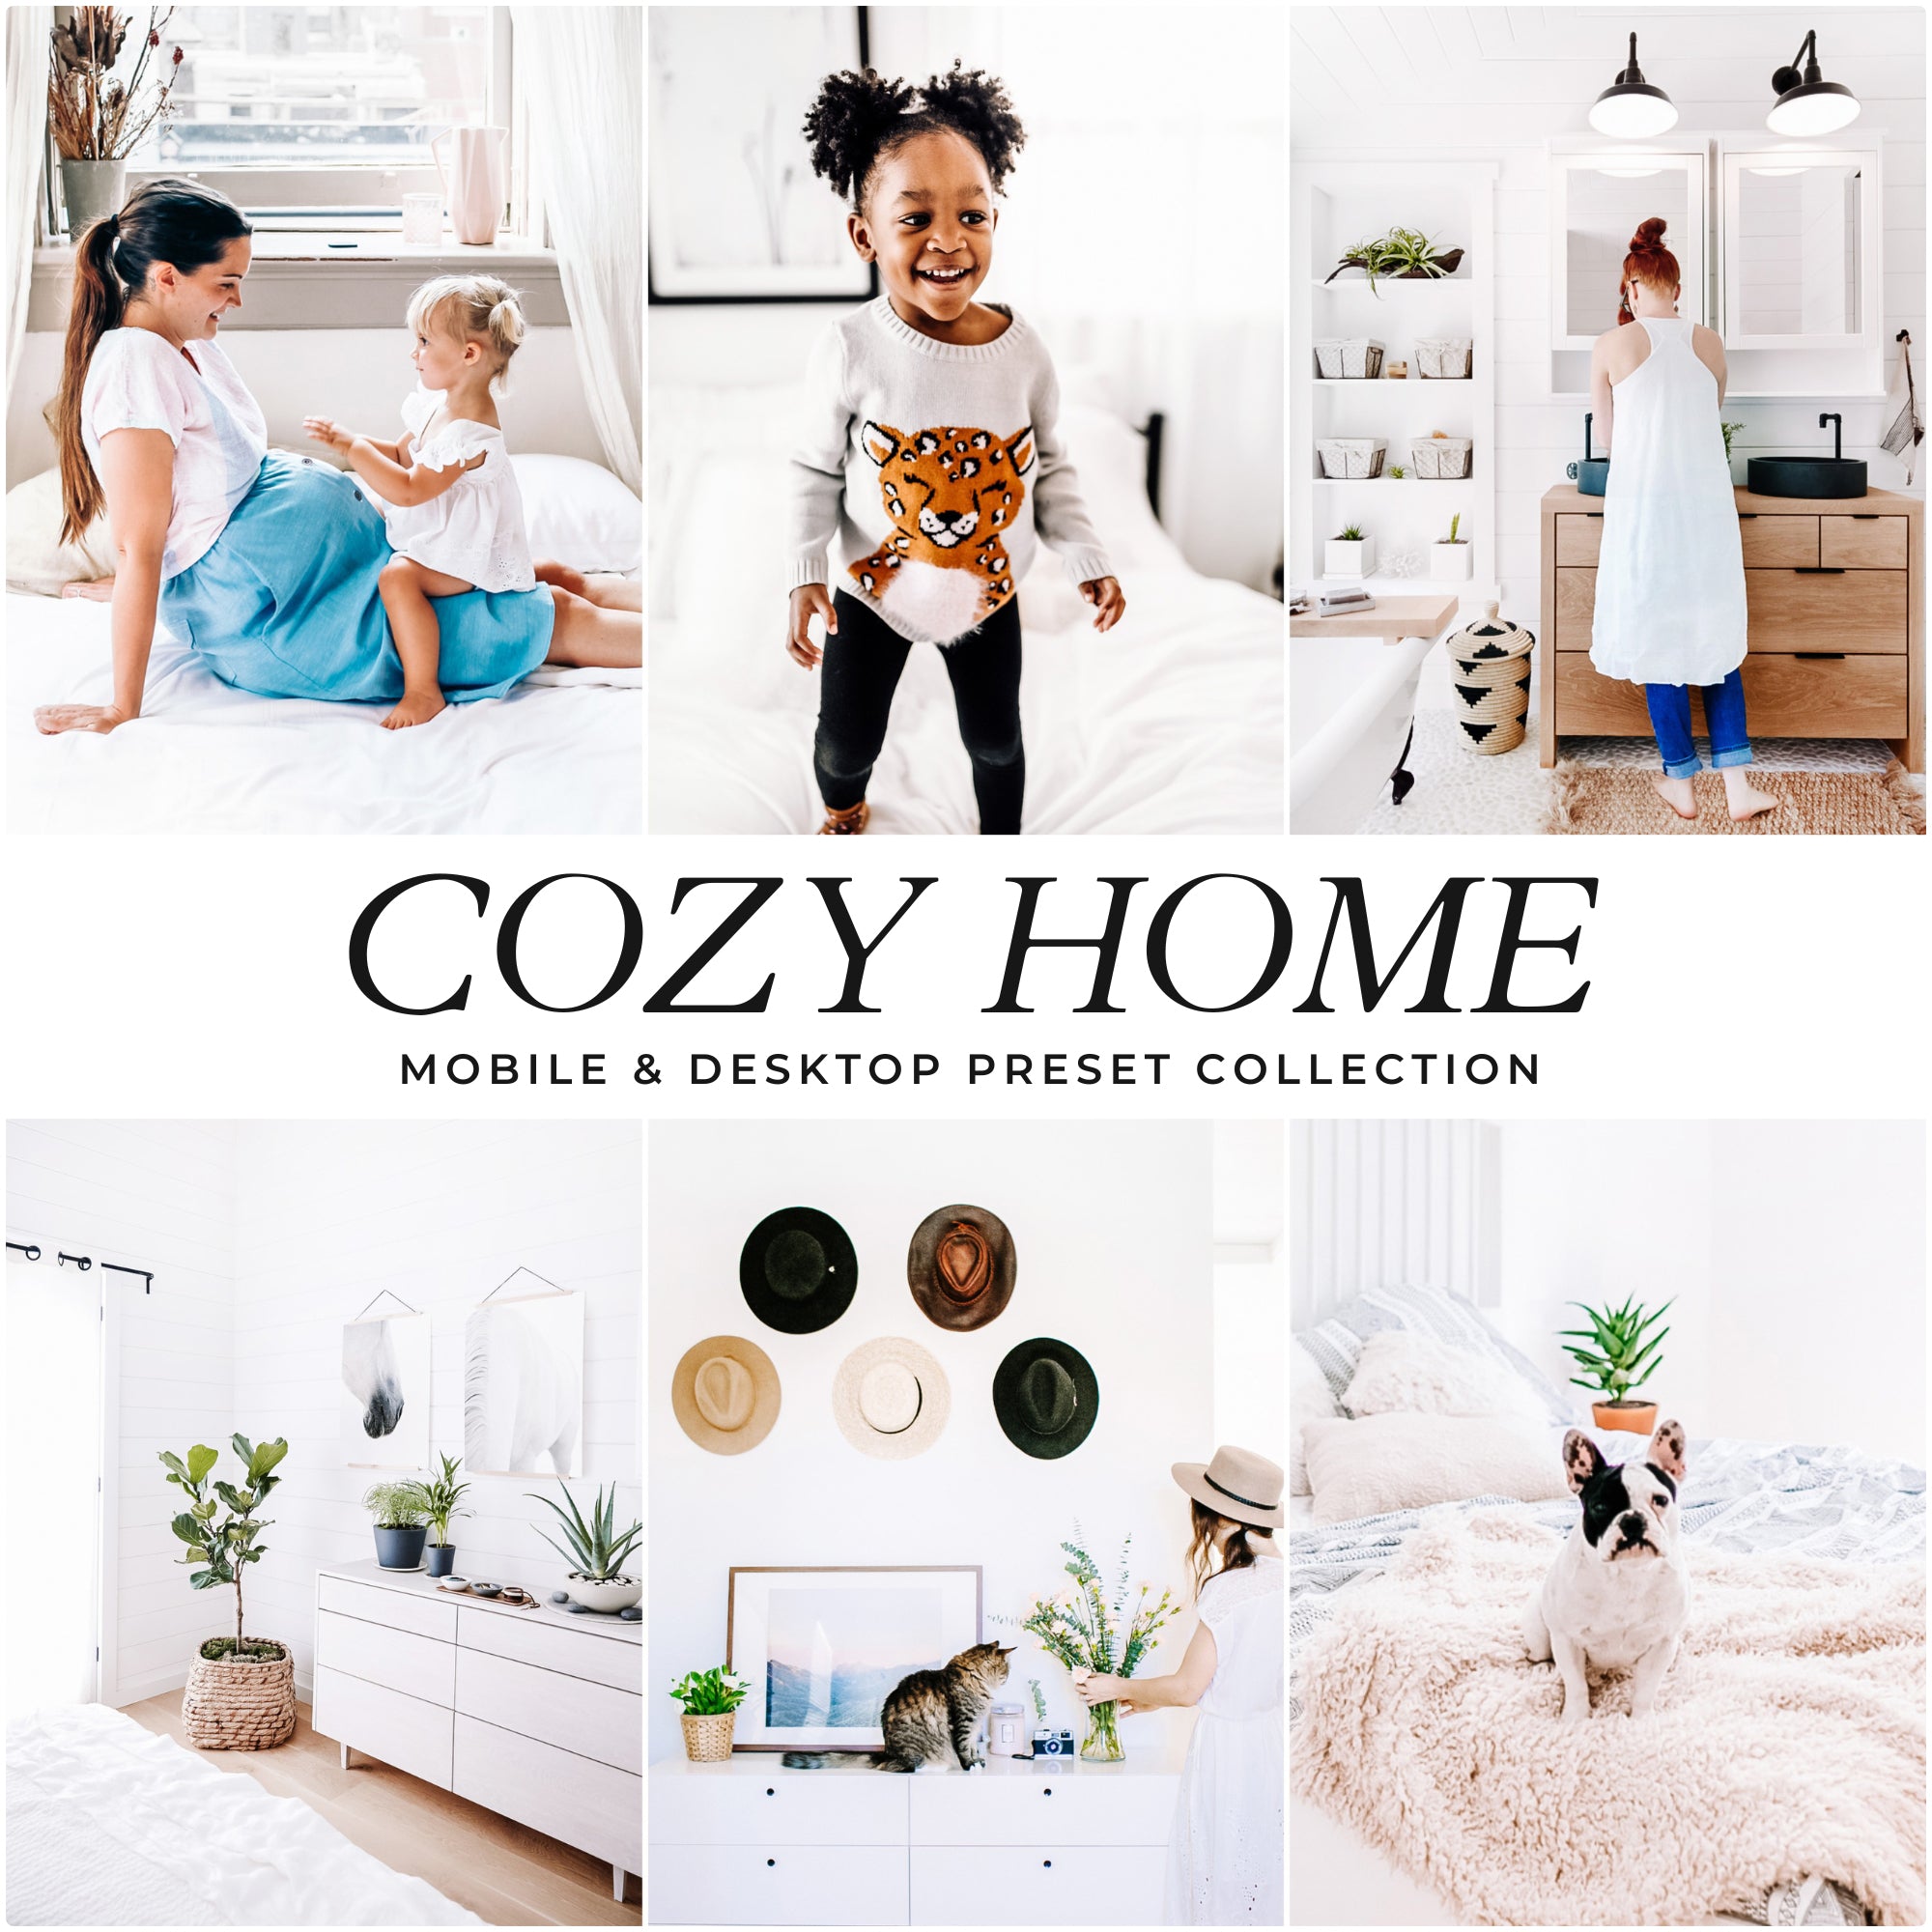 Cozy Home Lightroom Presets The Best Instagram Influencer and Blogger Presets by Lou And marks Presets